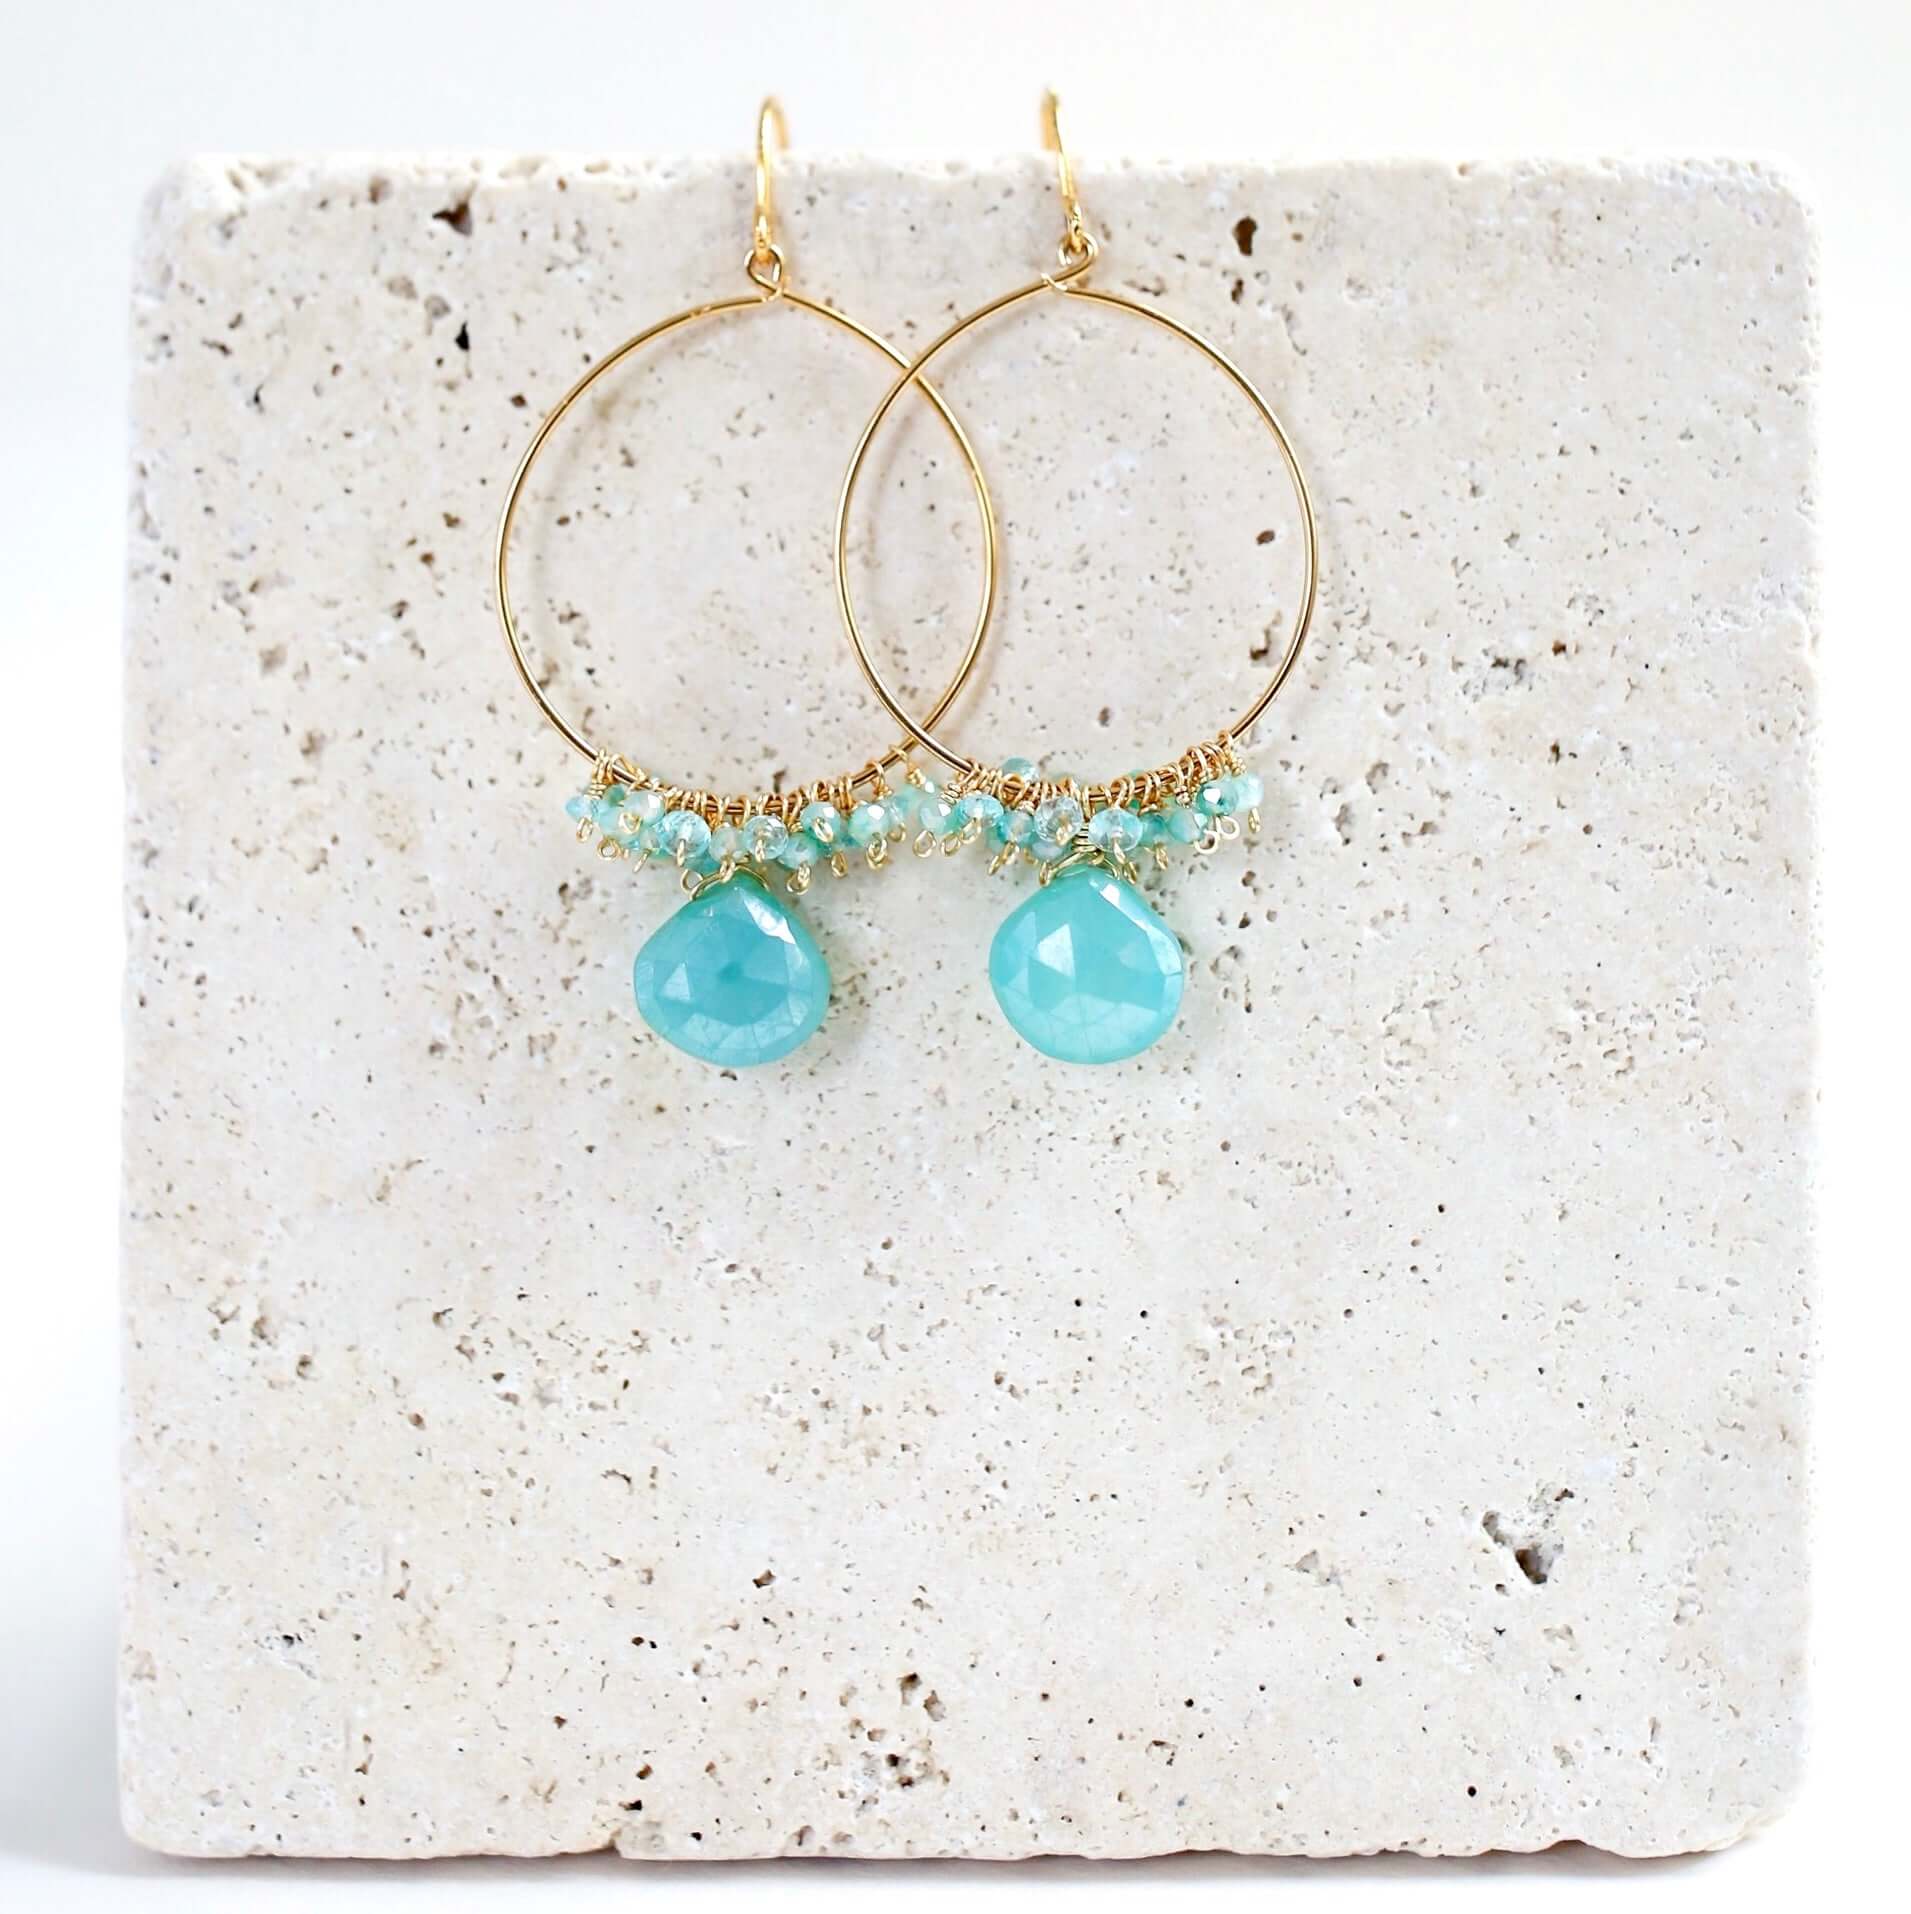 Swing Earrings featuring Mystic Aqua Chalcedony gemstones and French hooks for a touch of effortless elegance